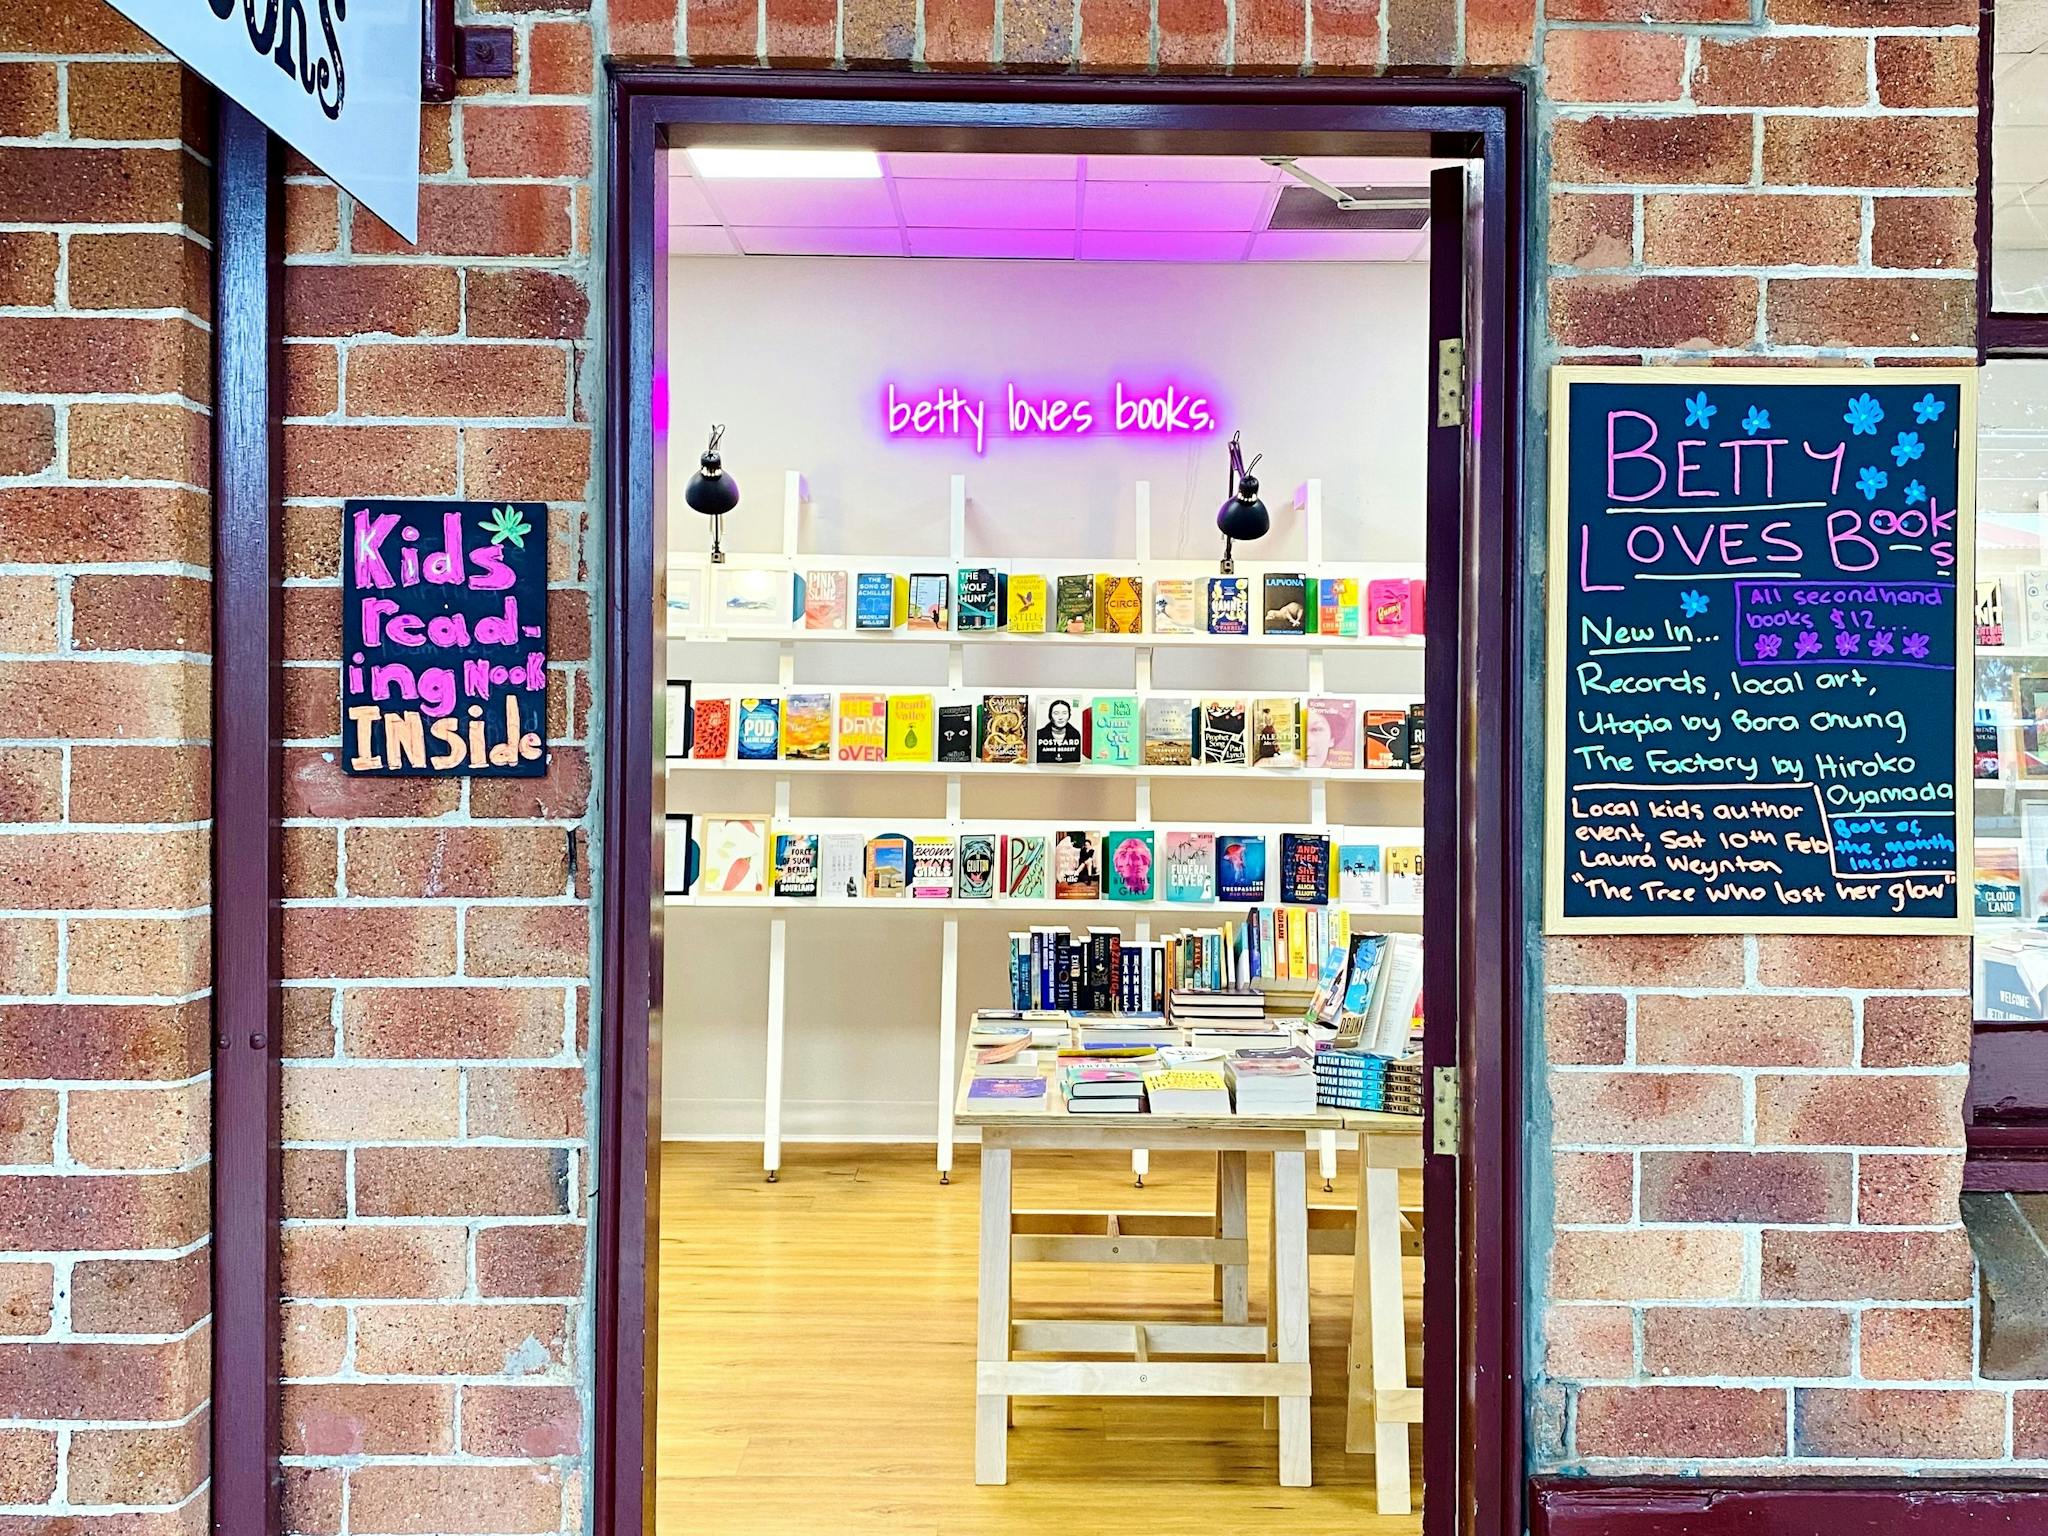 lookiong through a door you see bookshelves covered in colourful books and a neon sign